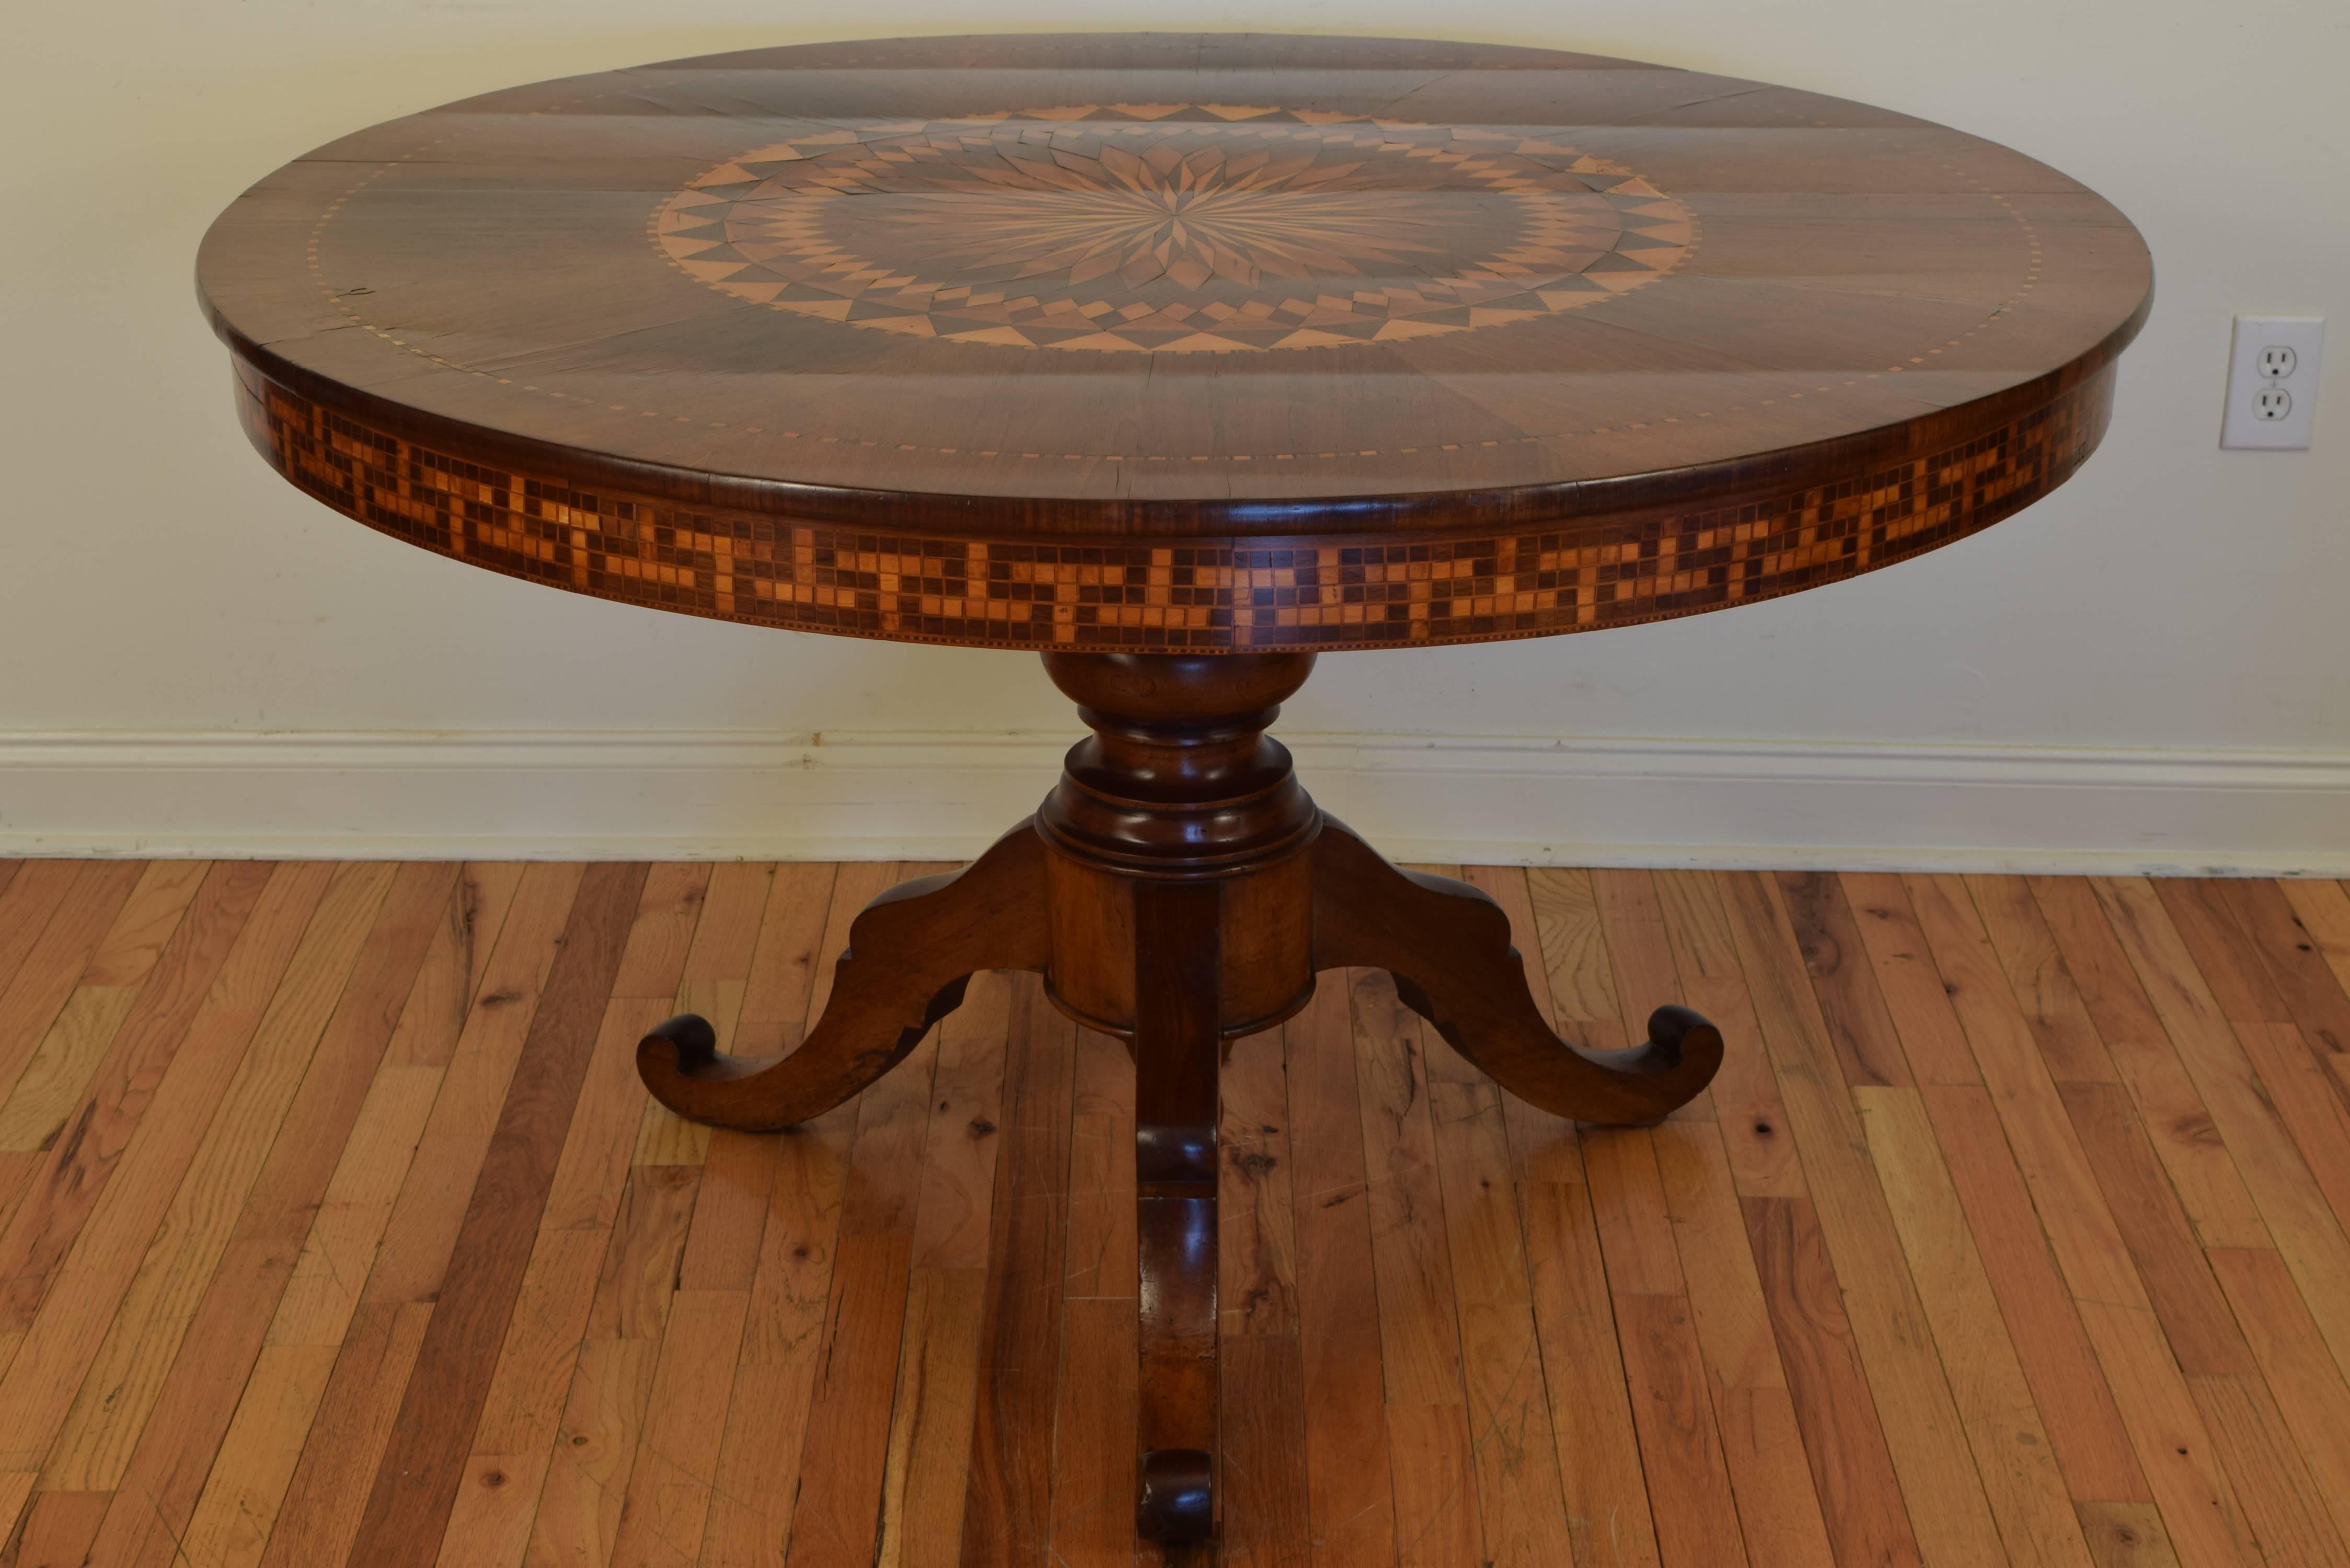 The circular top having a beautifully inlaid large center medallion with an outer gap-banded detail, the apron very unique in its geometric pattern raised on a turned columnar support with a tripartite base and shaped feet, 2nd Quarter of 19th